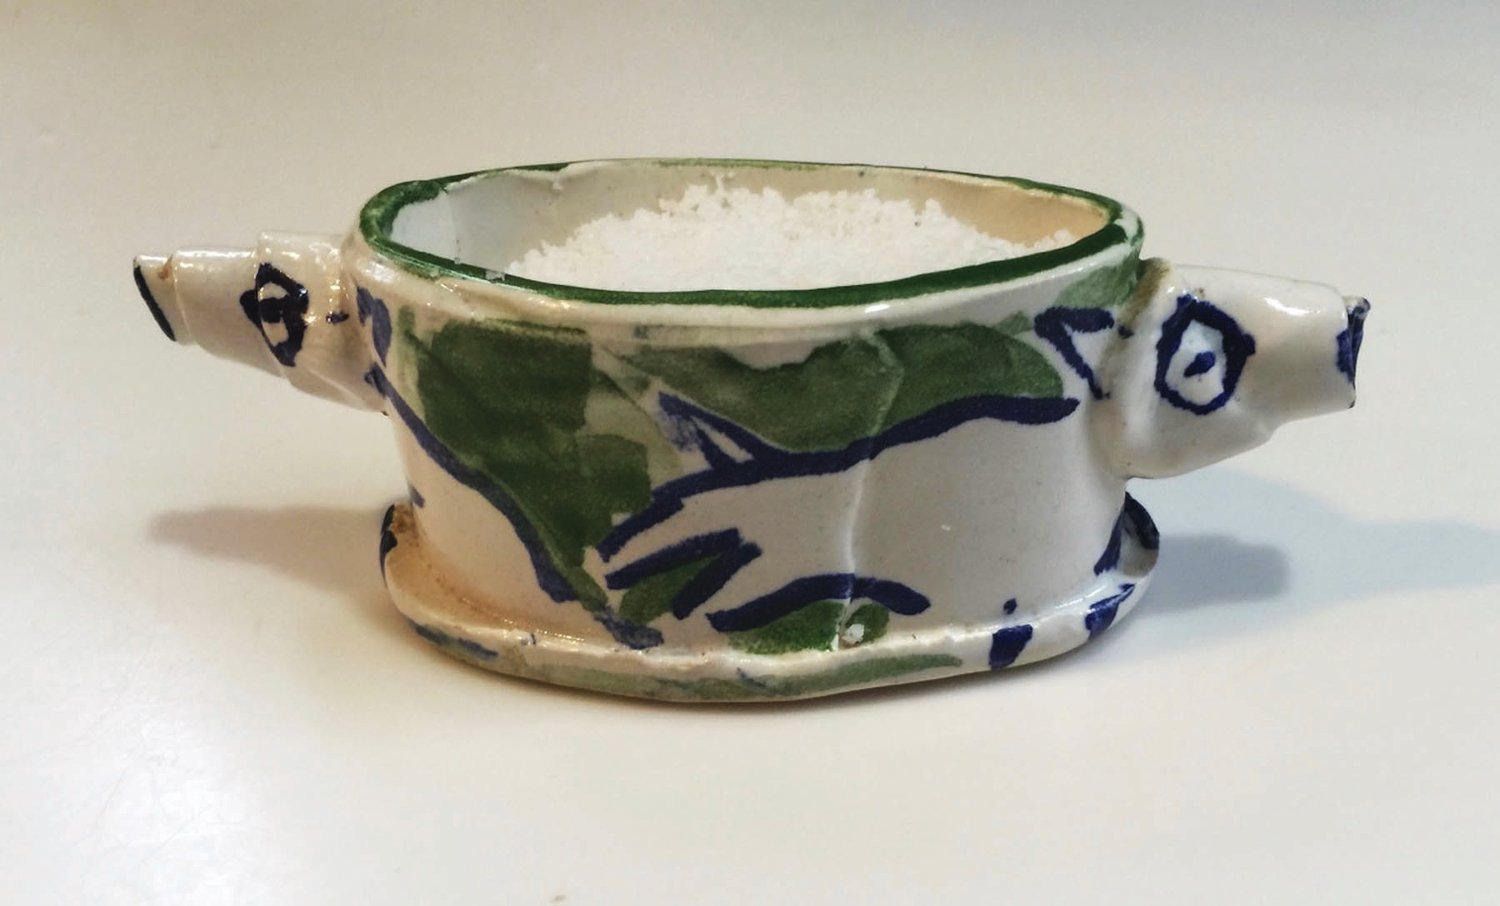 “Jack Russell Pot” is by Phoebe Wiley.